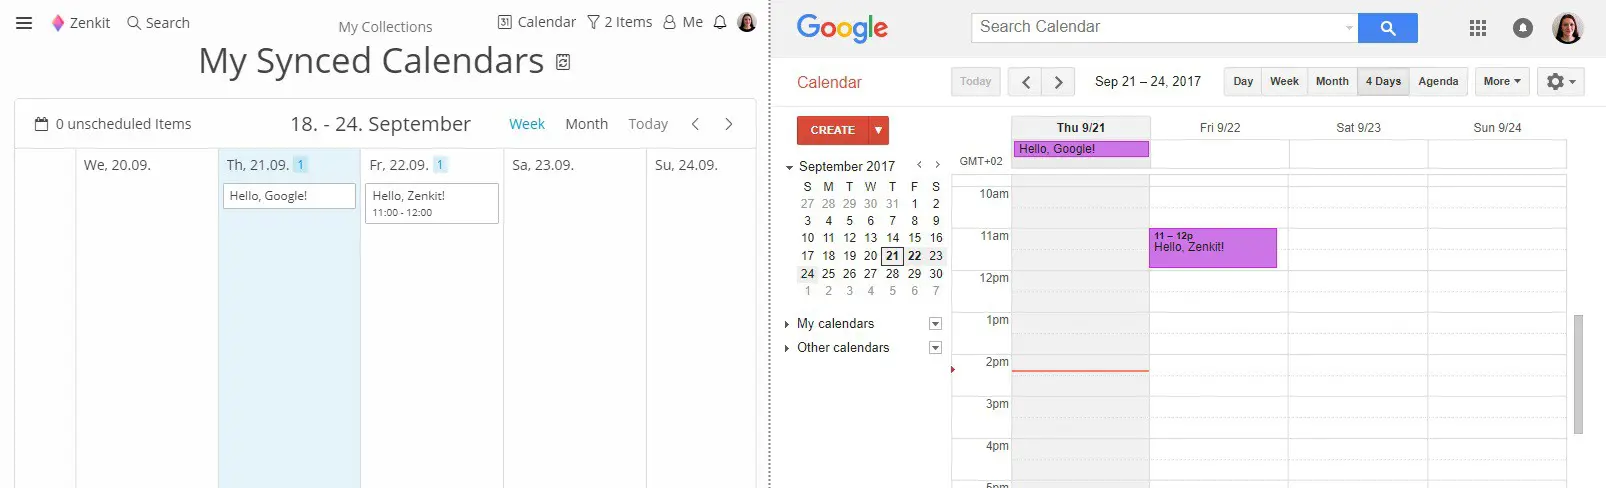 zenkit and google calendars next to each other